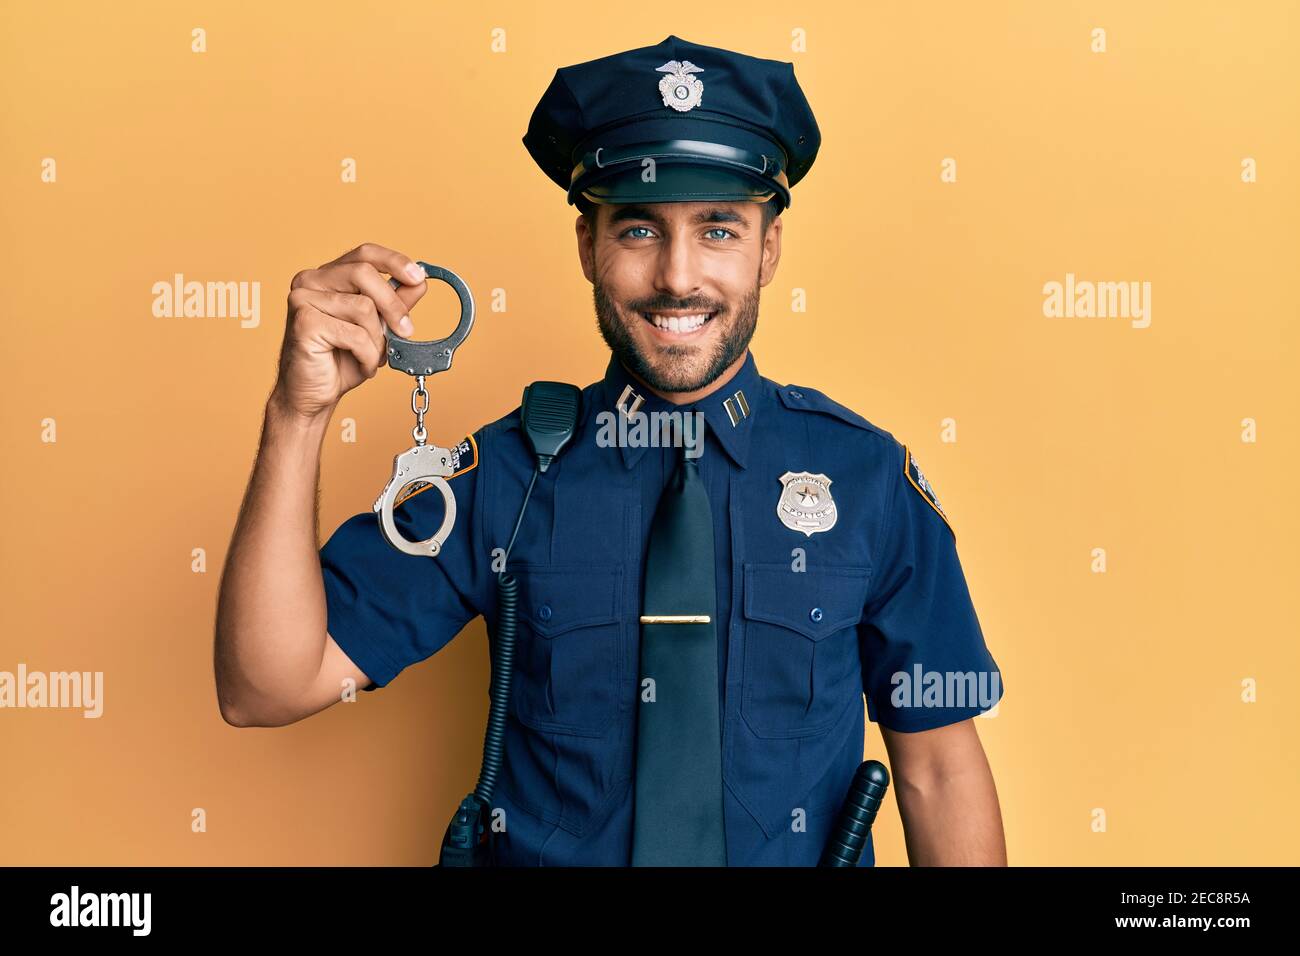 Handsome hispanic man wearing police uniform holding metal handcuffs looking positive and happy standing and smiling with a confident smile showing te Stock Photo